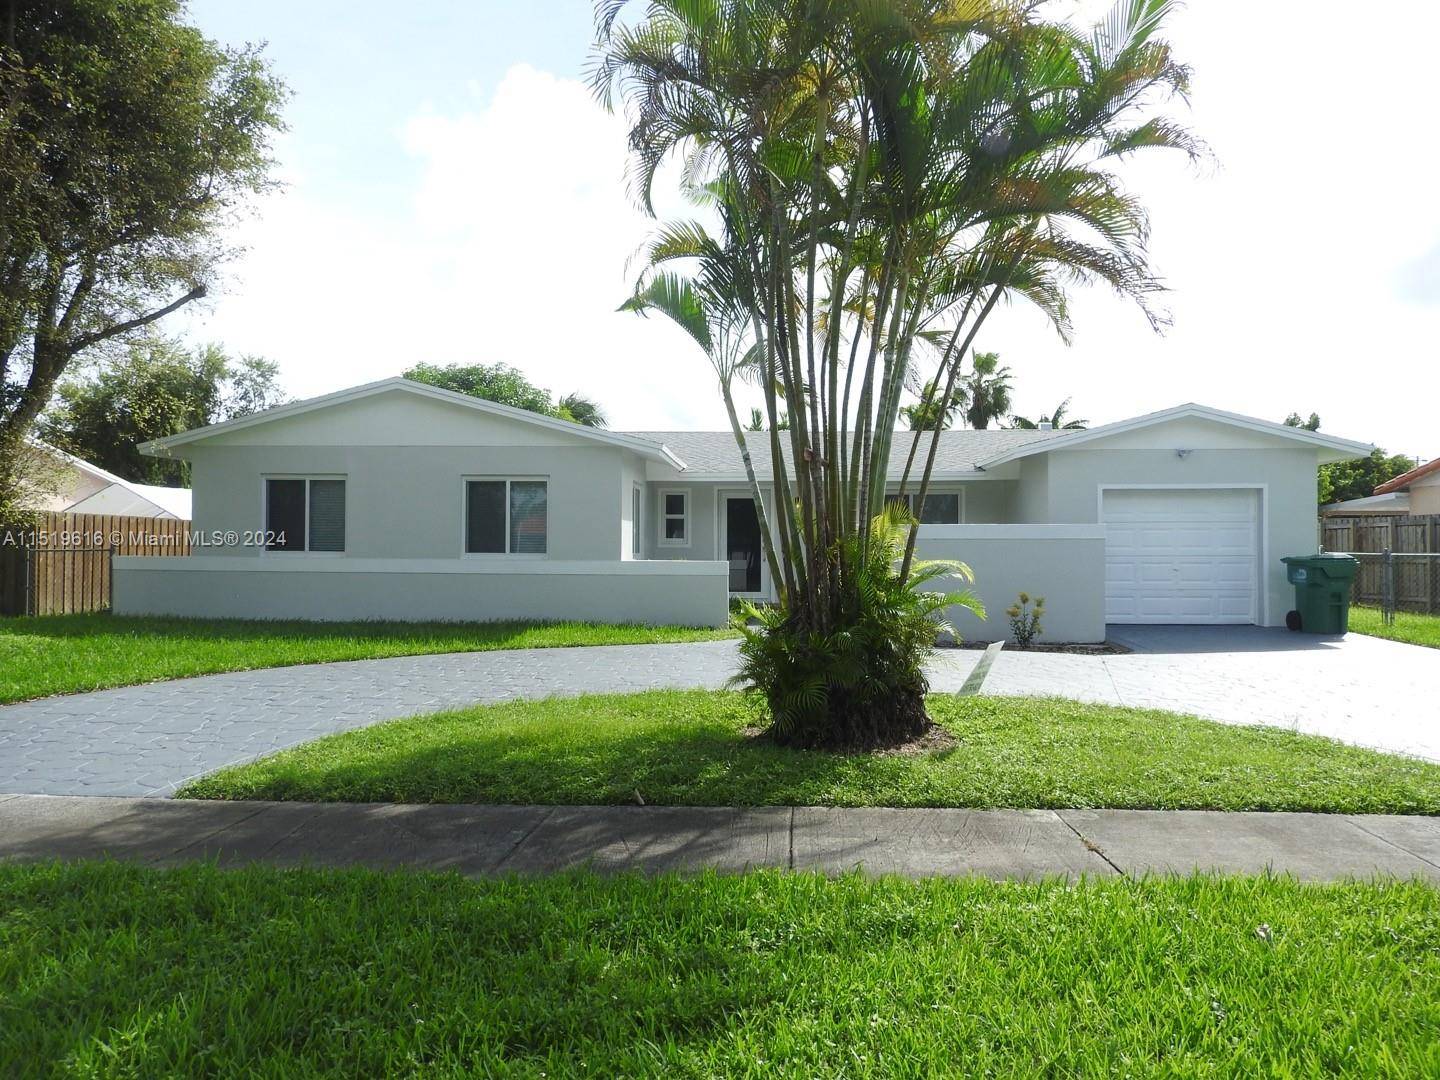 Beautiful, updated 4 bedroom home in the heart of Kendall.